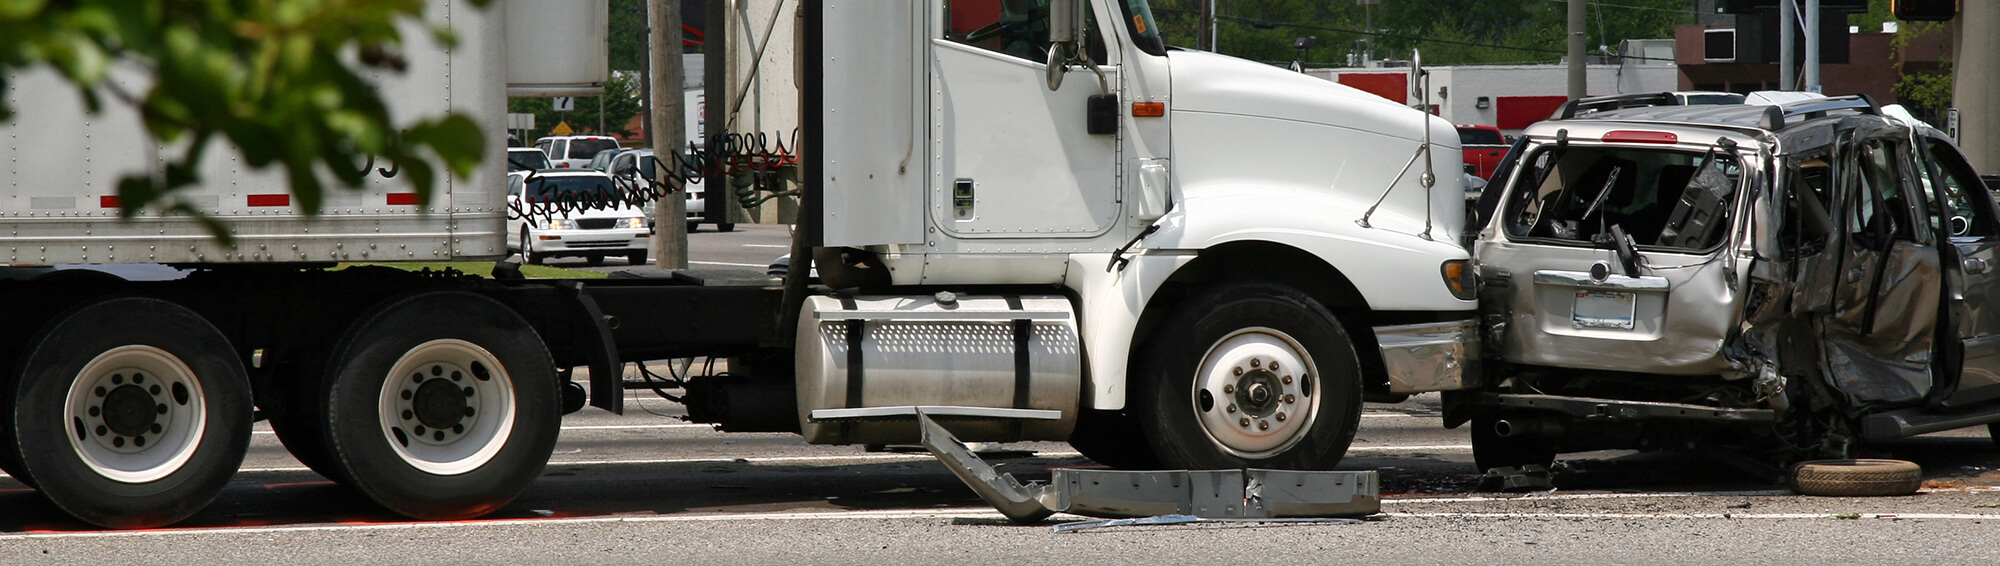 Was the Truck Driver Who Hit You Fatigued?